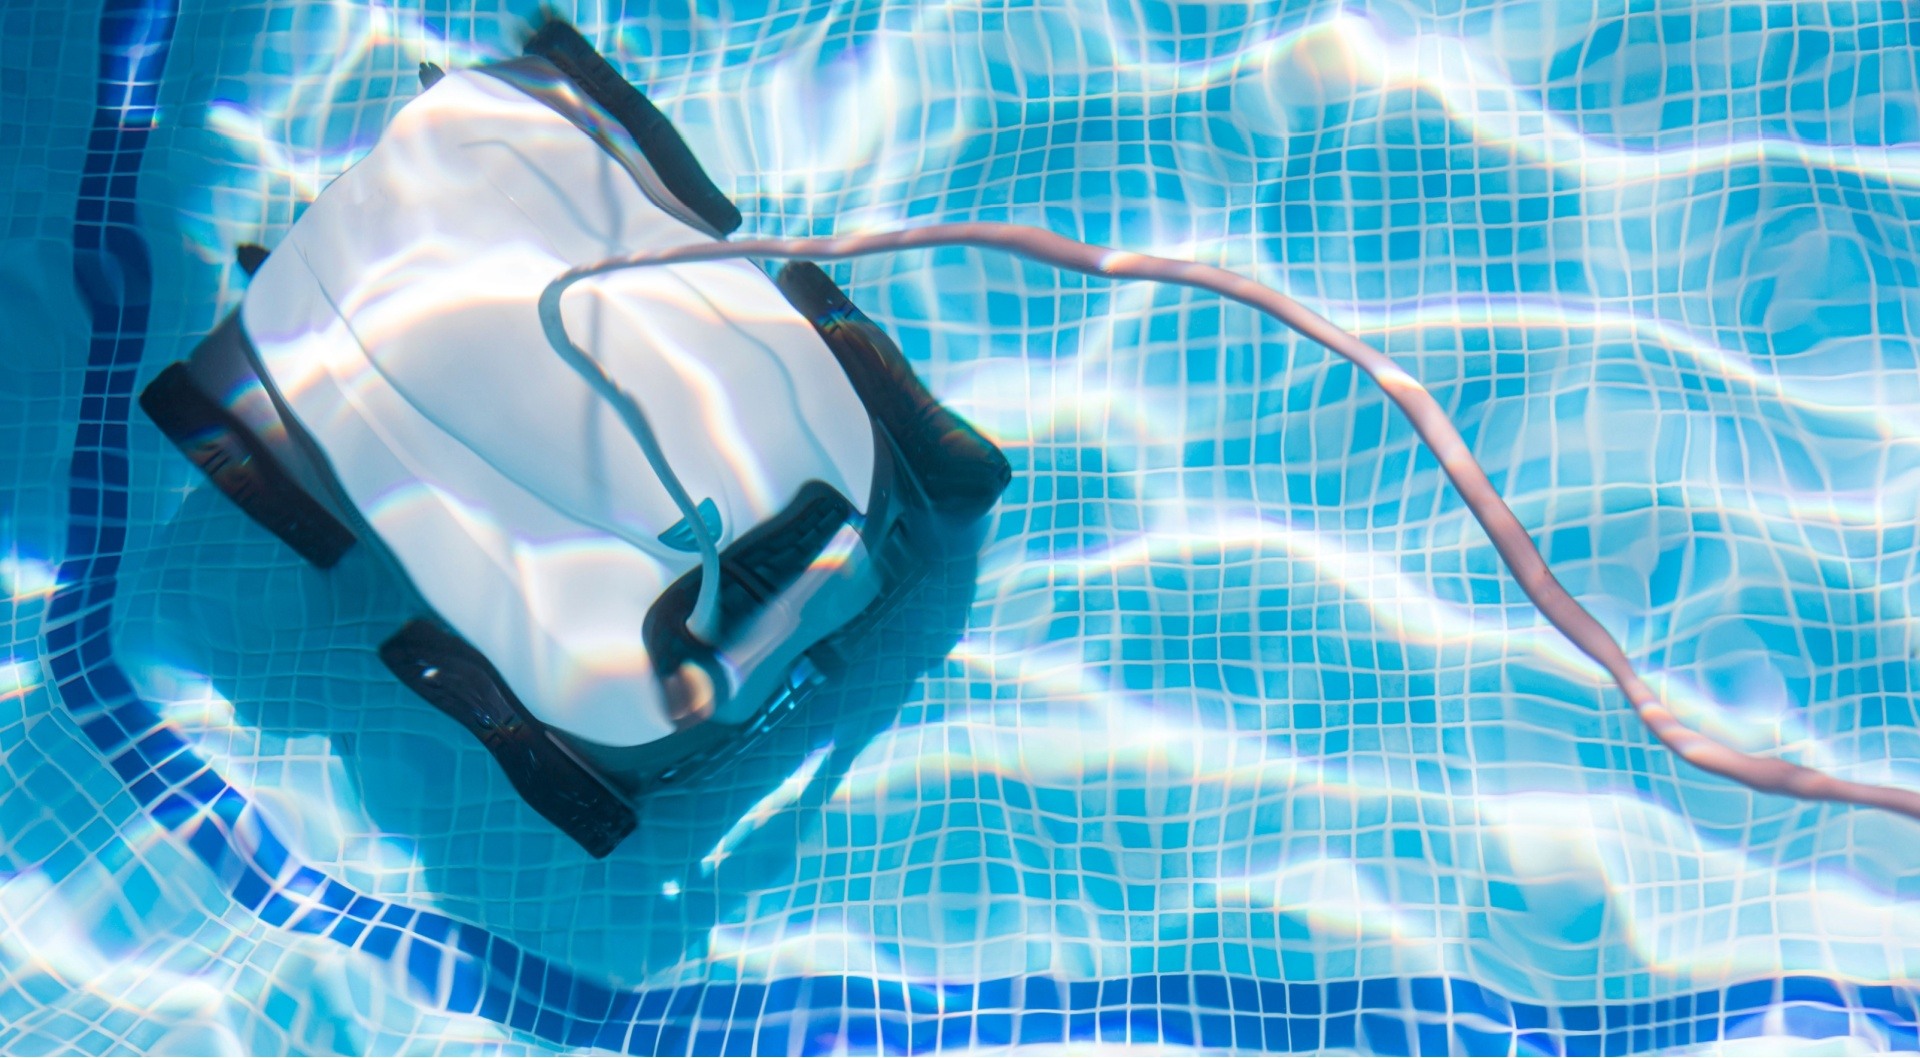 Robotic pool cleaner at the bottom of a pool 